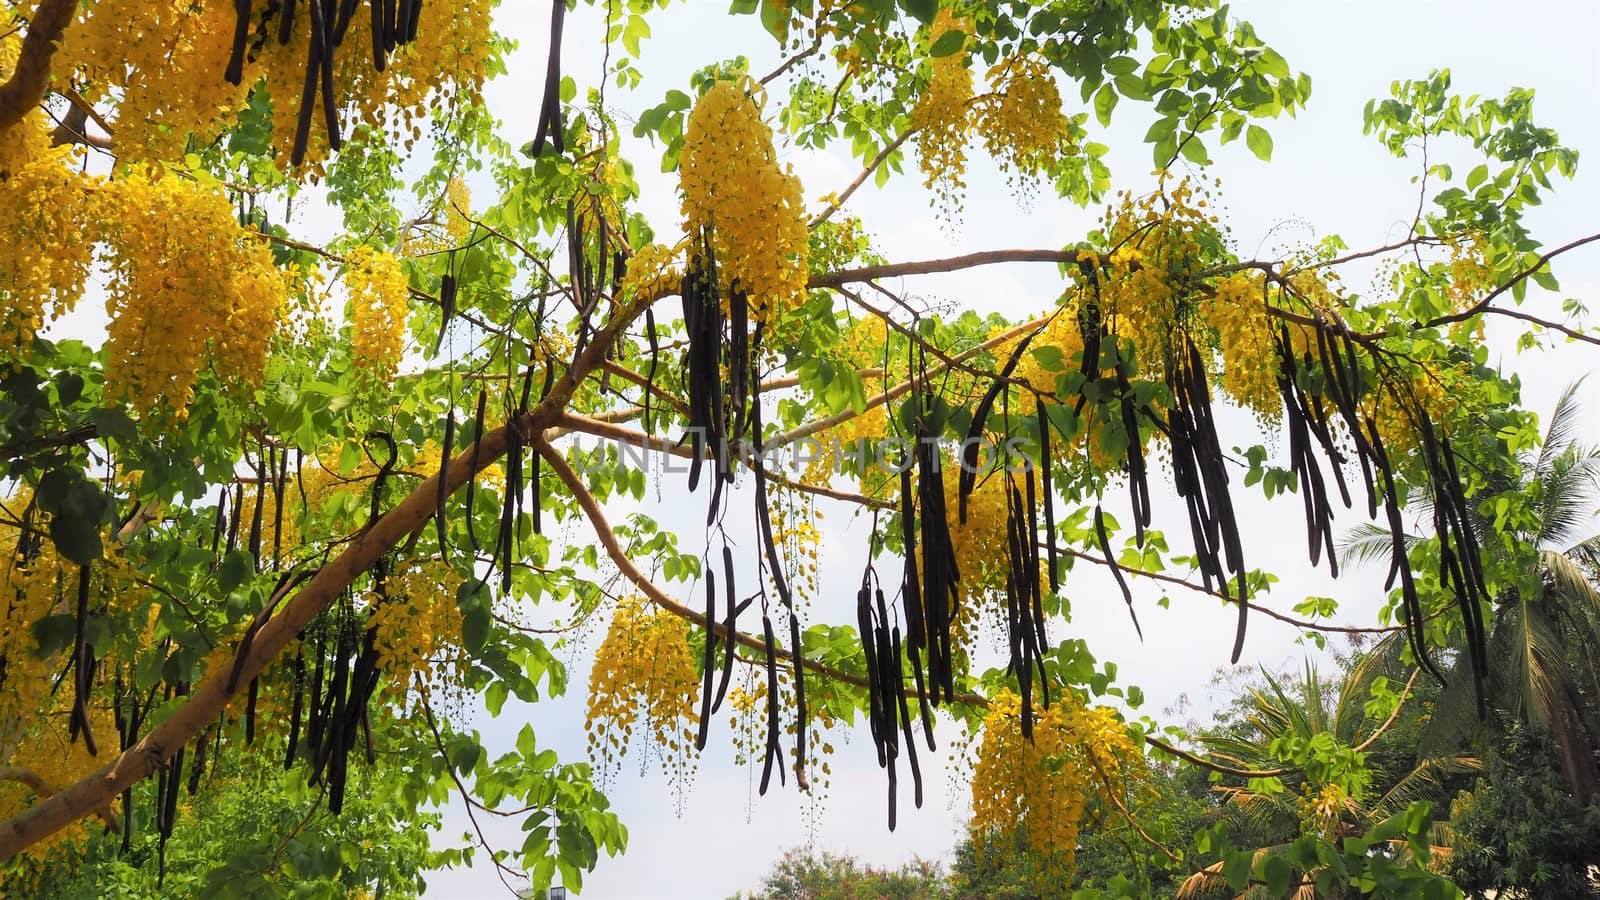 siem reap cambodia river and yellow tree flowering golden shower